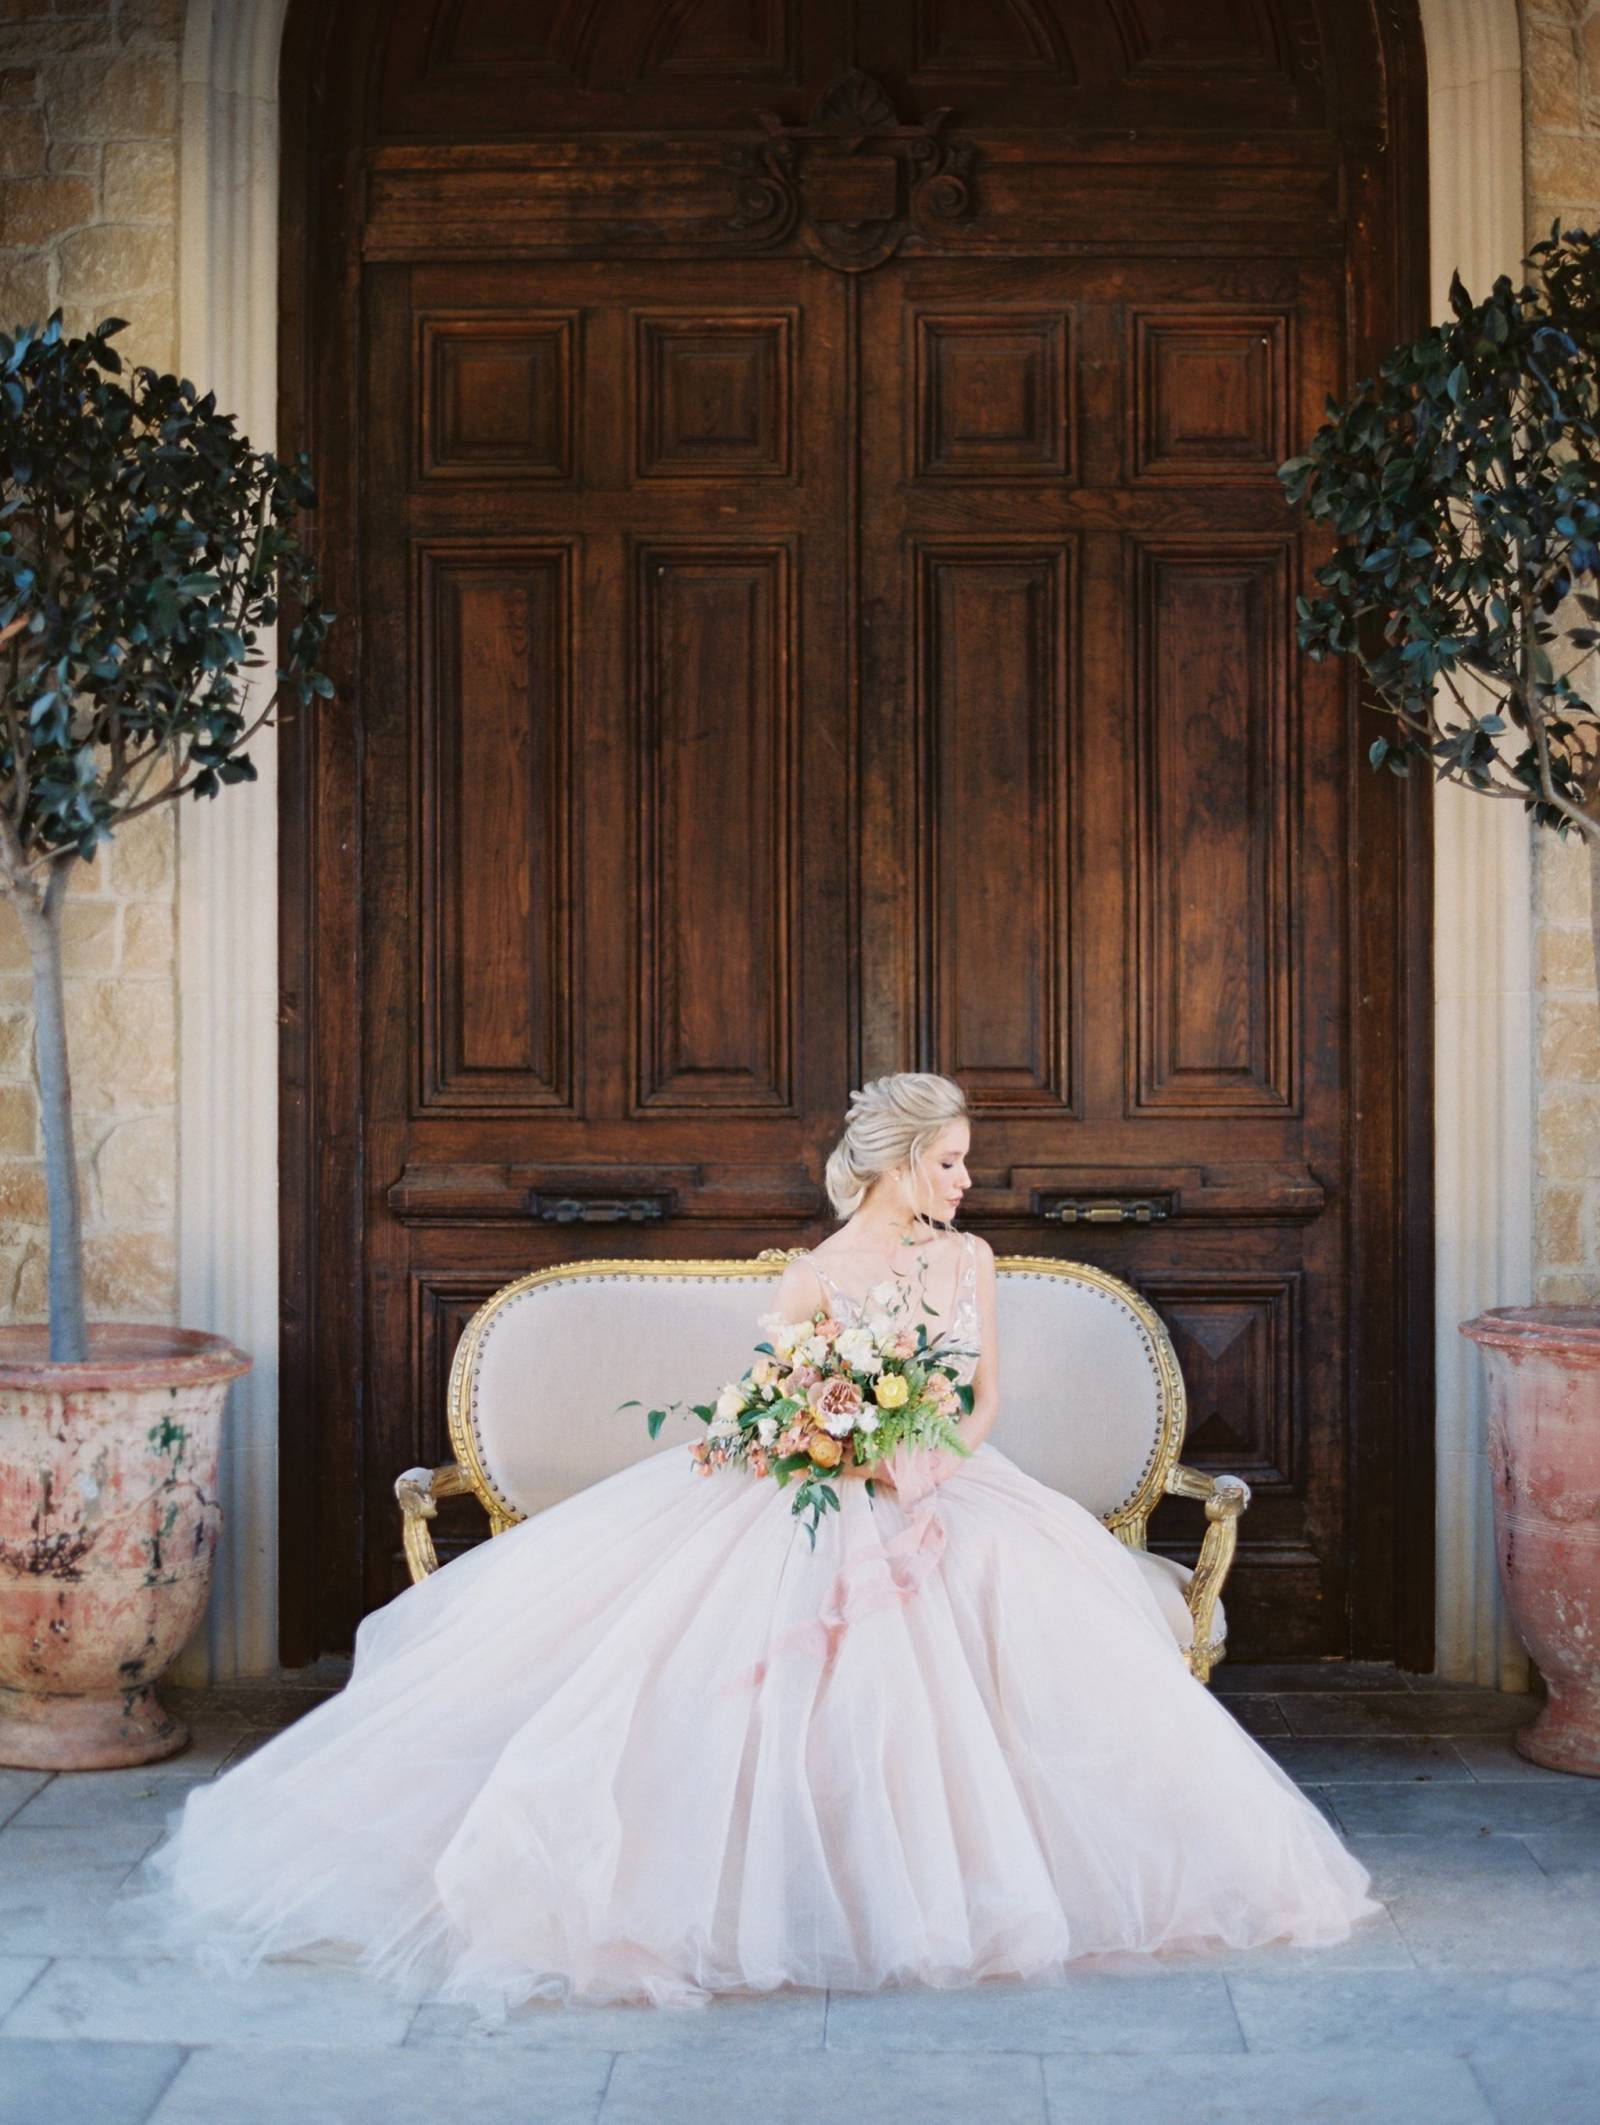 https://www.magnoliarouge.com/inspiration/romantic-tuscan-wedding-inspiration-with-spring-florals/